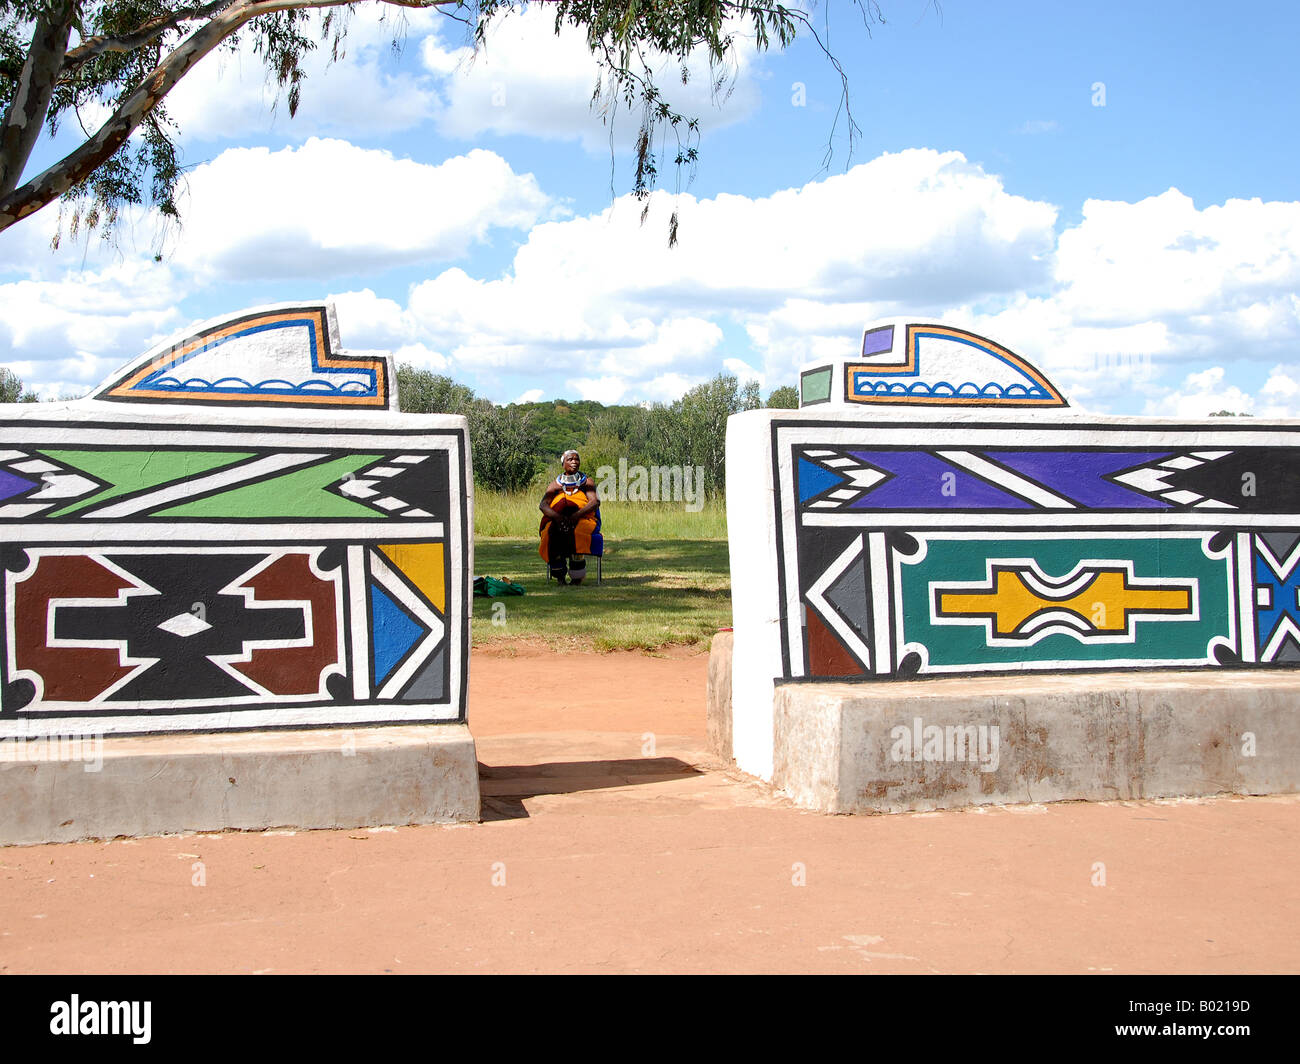 Two Ndebele woman in their traditional clothing in the museum village of Botshabelo in South Africa near Middelburg. Stock Photo